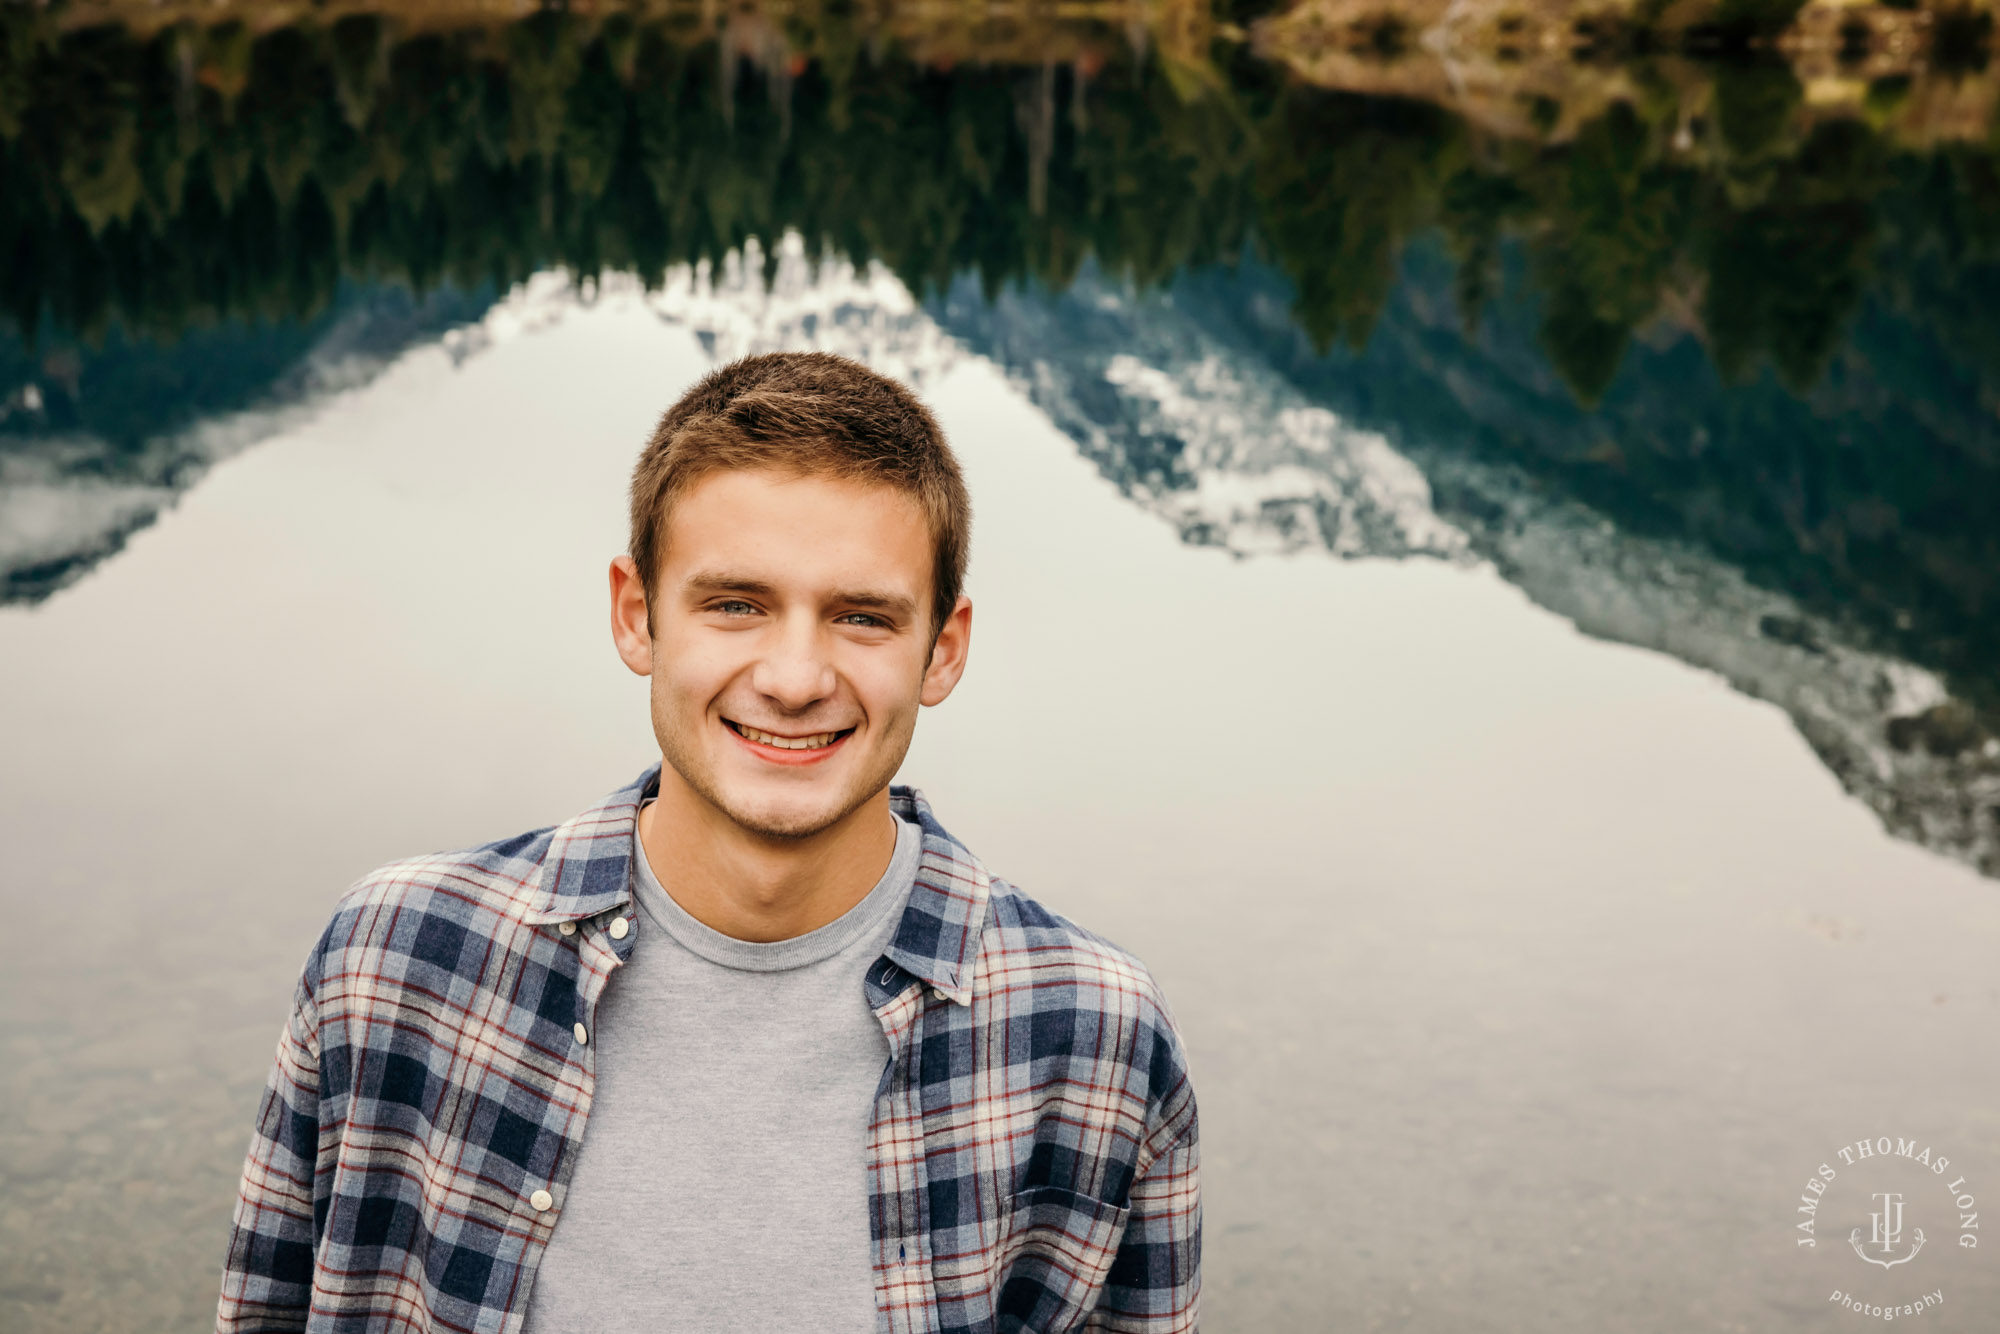 Seattle senior portrait photography session by James Thomas Long Photography